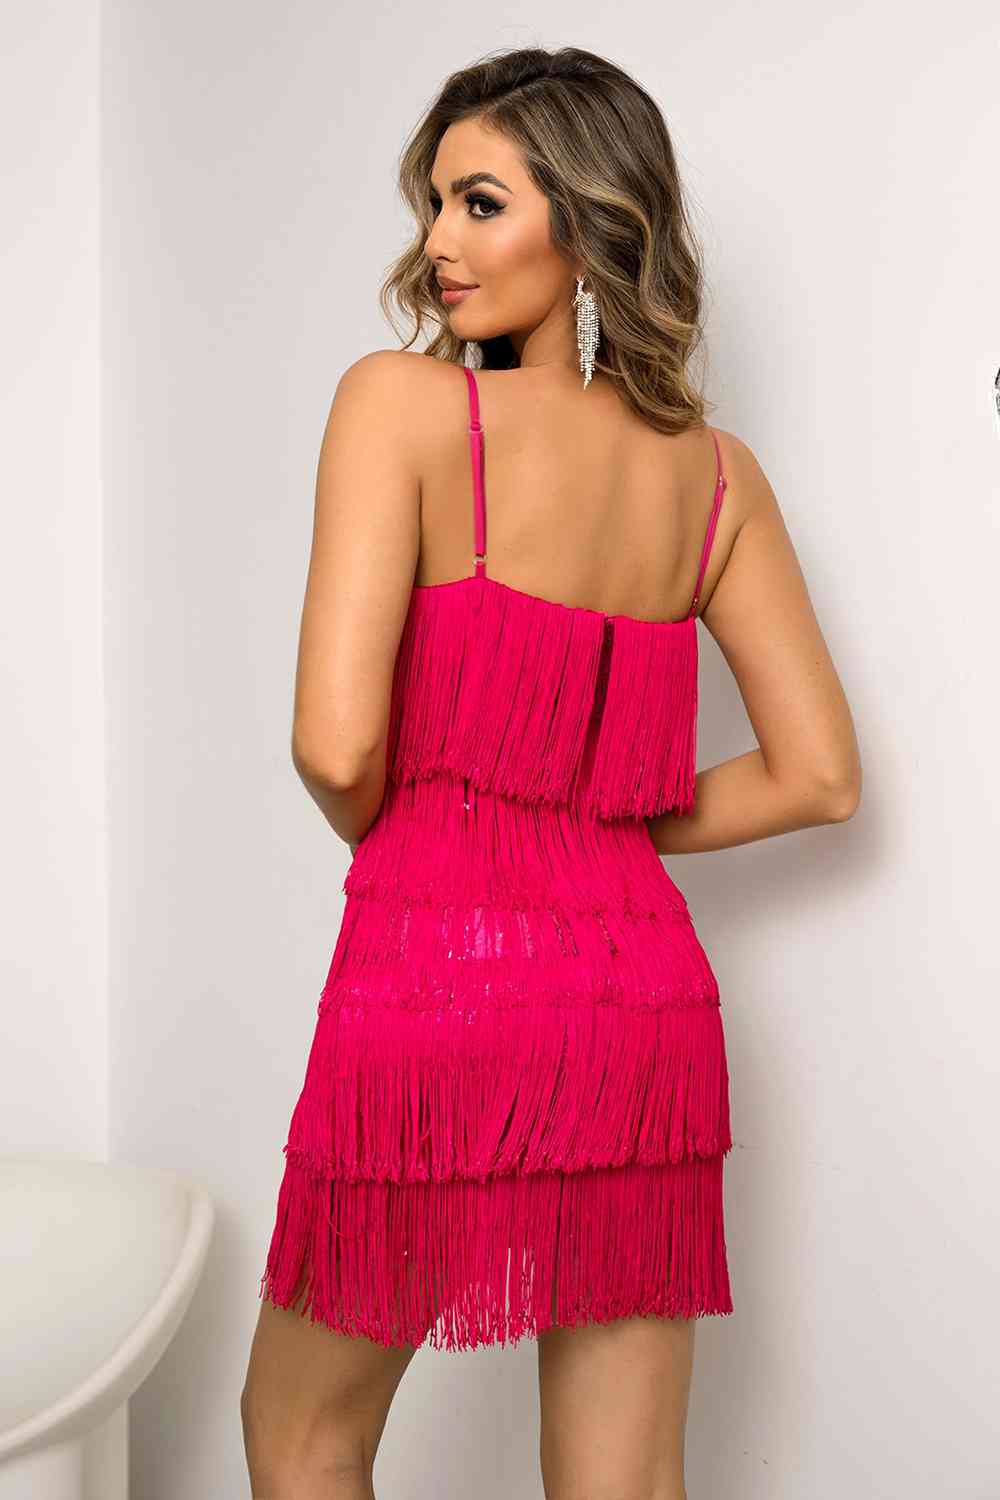 A chic mini dress adorned with playful fringes, adding a touch of fun and movement to your outfit.